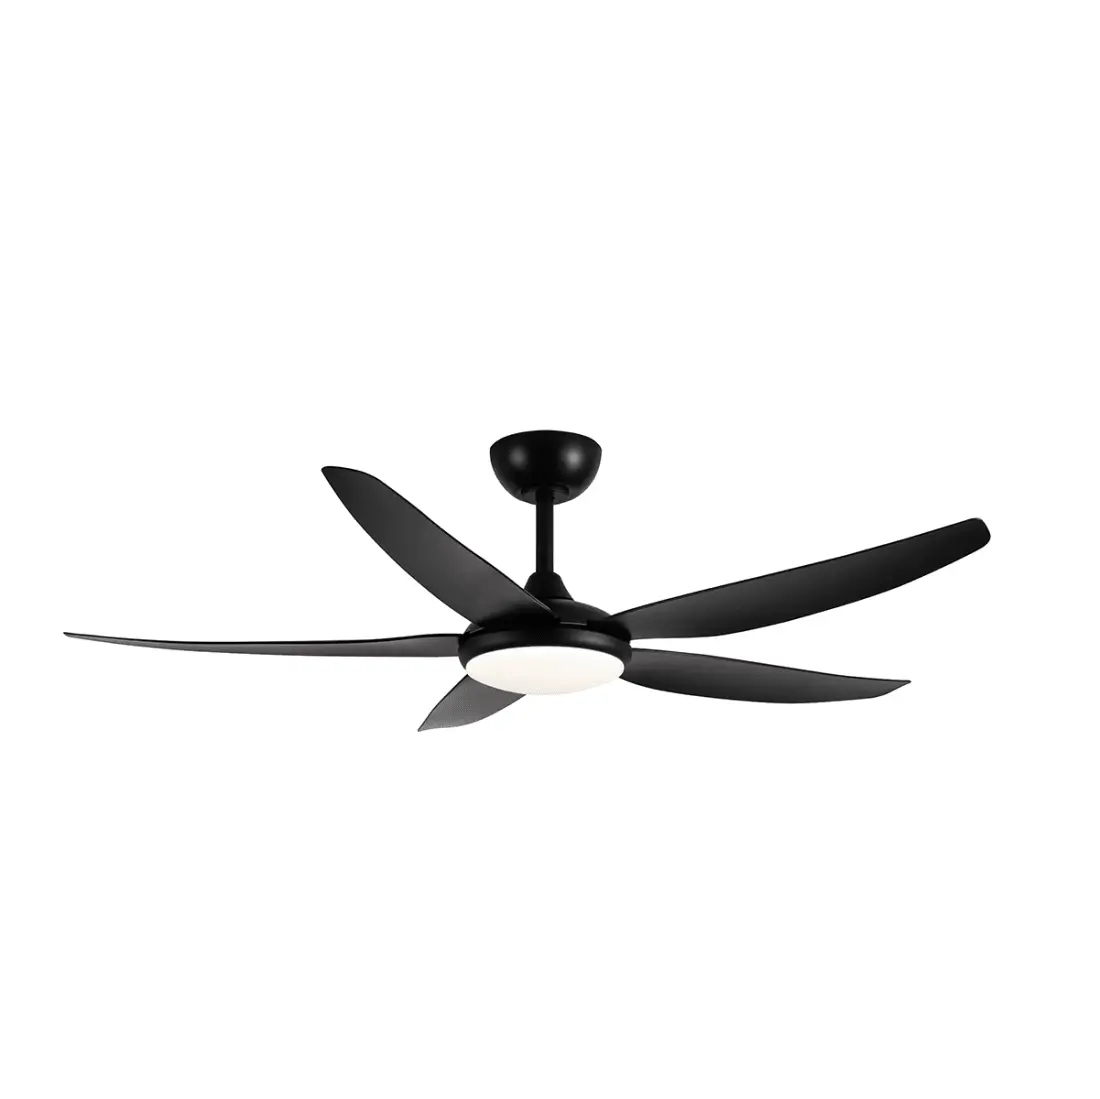 Product image of Amari Black Fan with Black Blades with LED Light